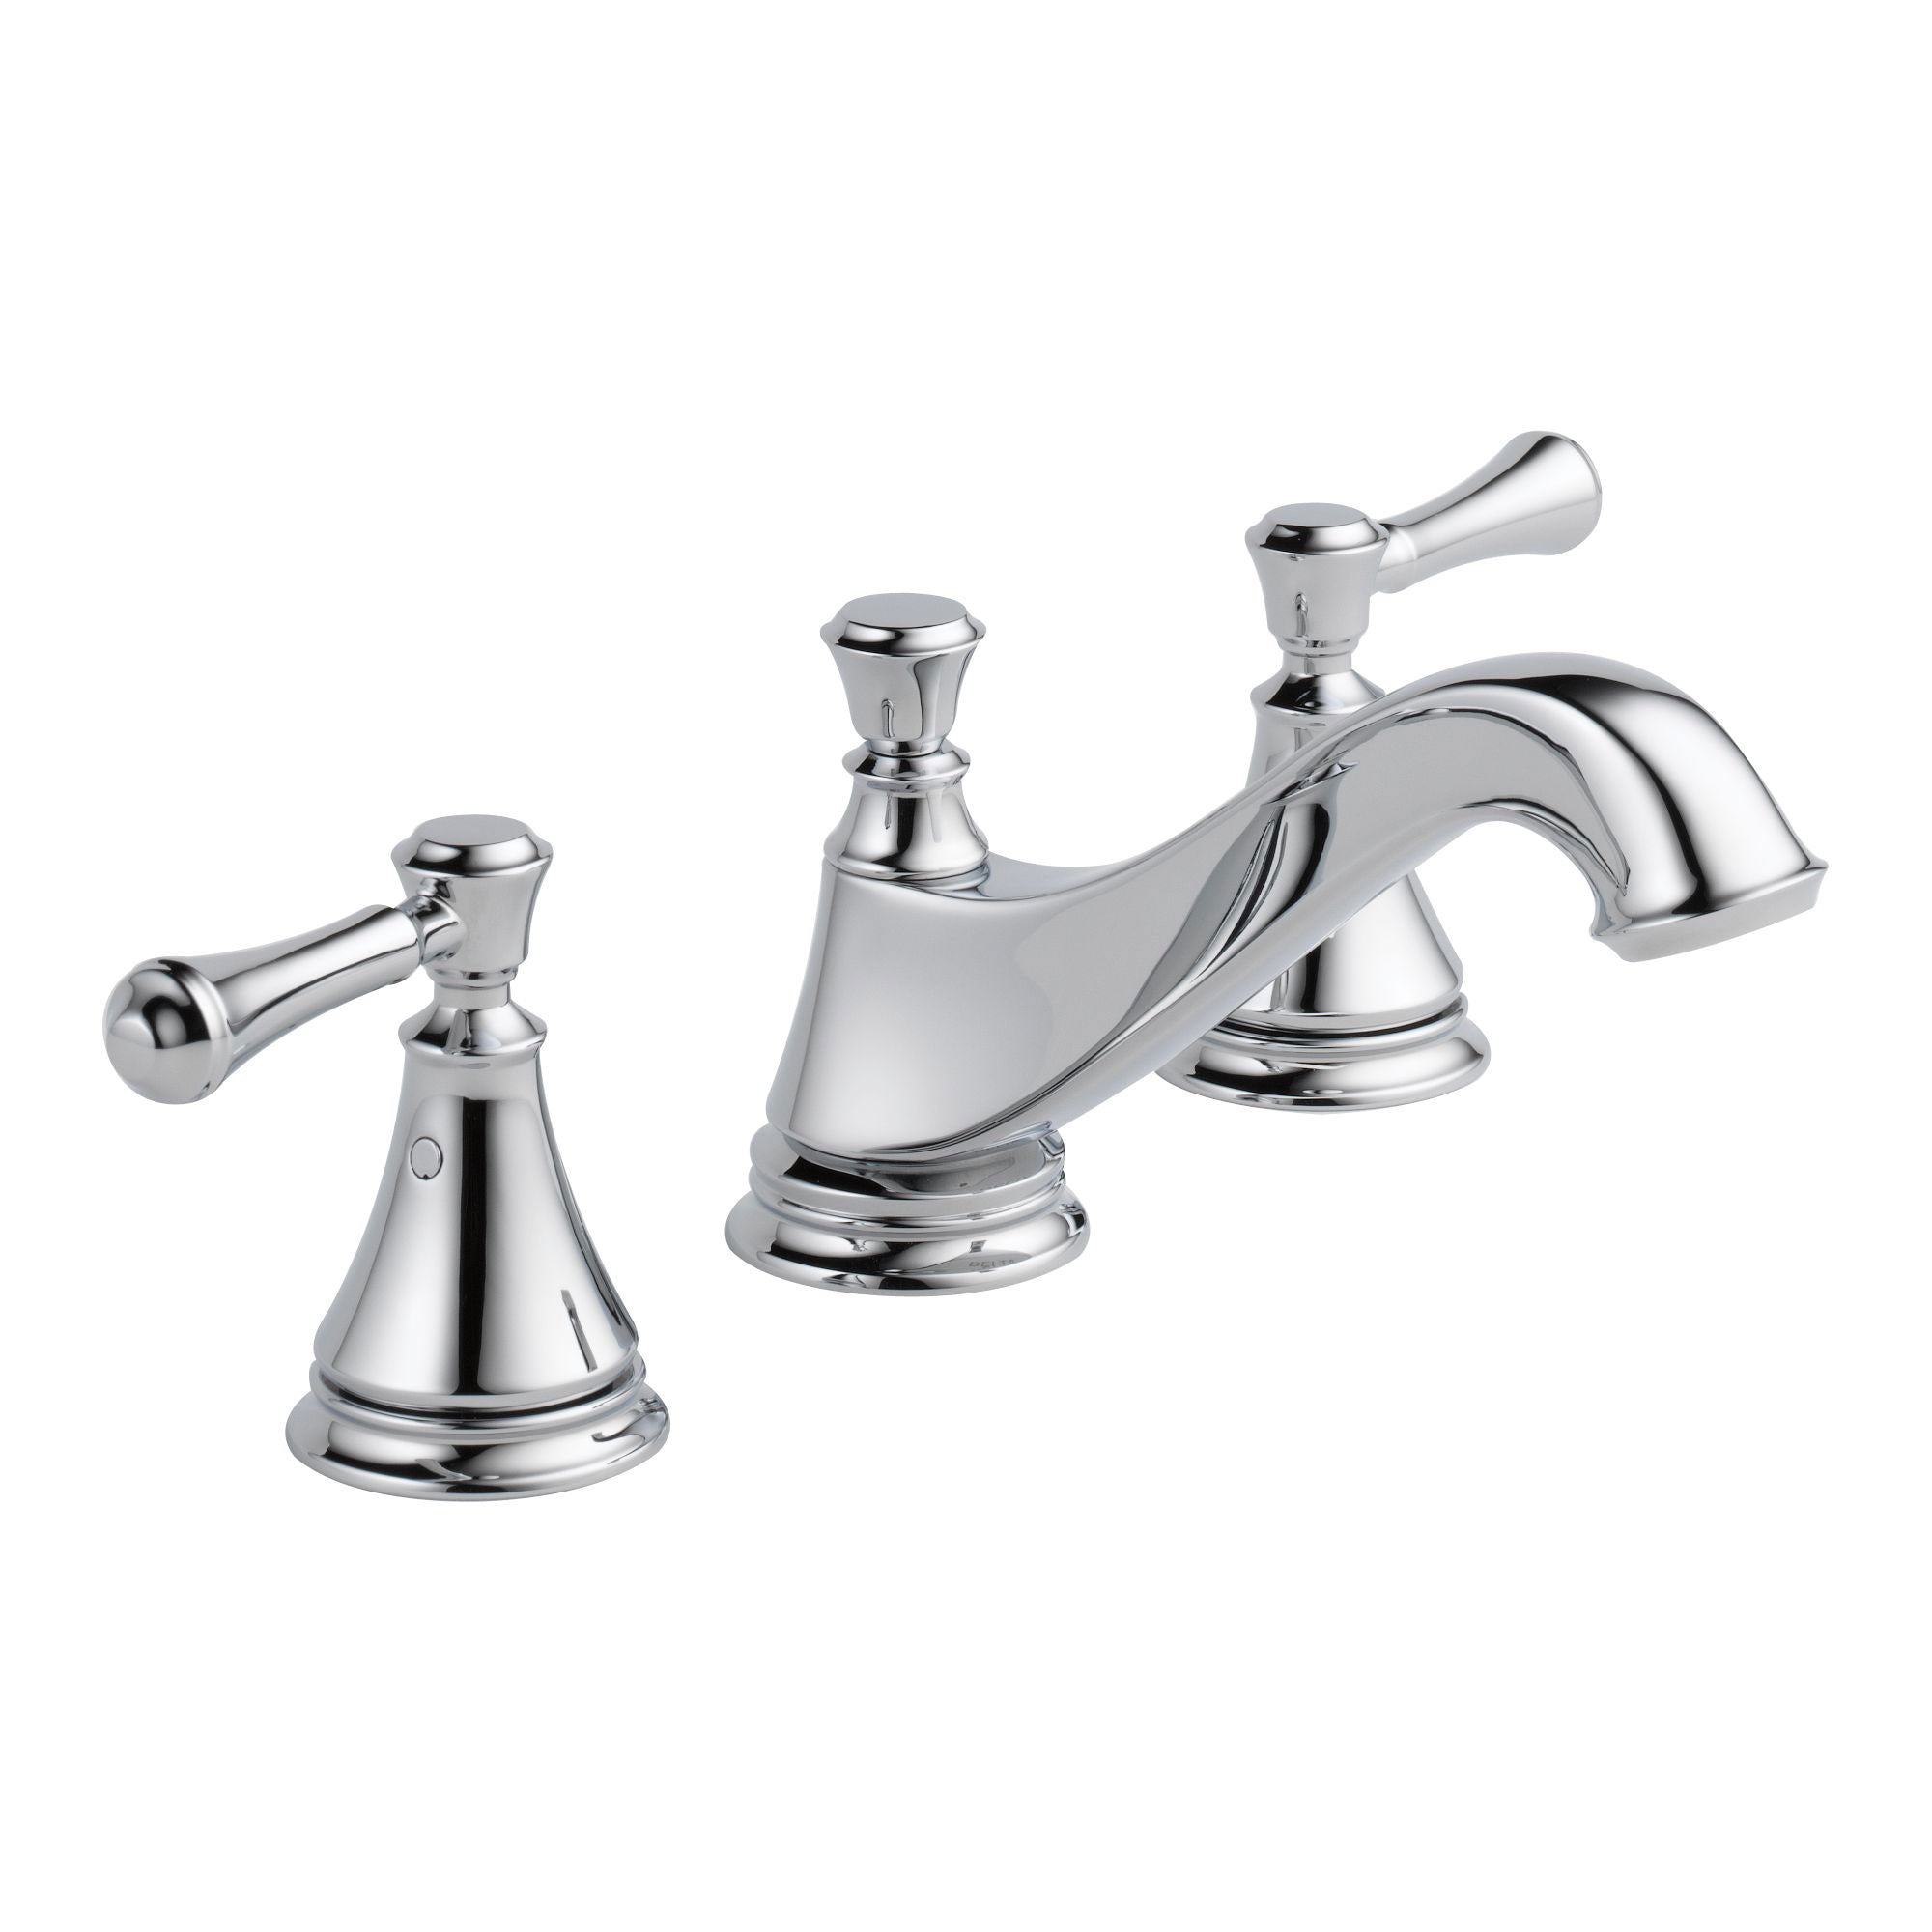 Delta Cassidy Chrome Finish Widespread Lavatory Low Arc Spout Bathroom Sink Faucet INCLUDES Two Lever Handles and Matching Metal Pop-Up Drain D1317V